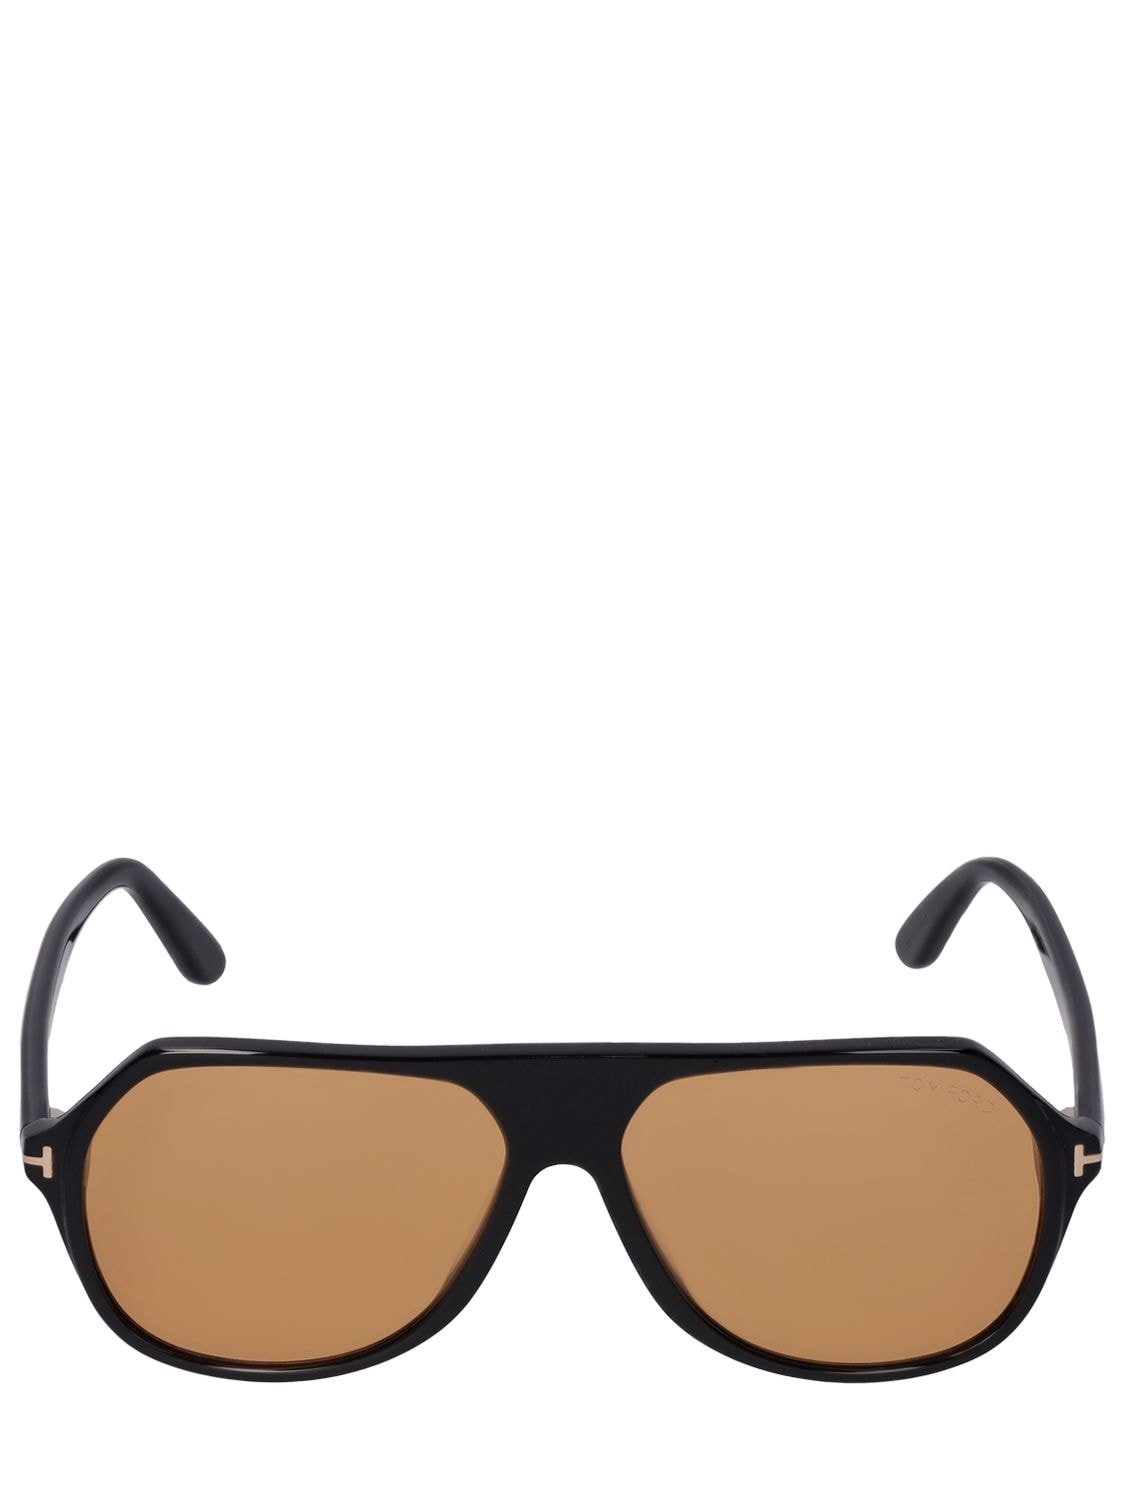 Men's TOM FORD Sunglasses Sale, Up To 70% Off | ModeSens